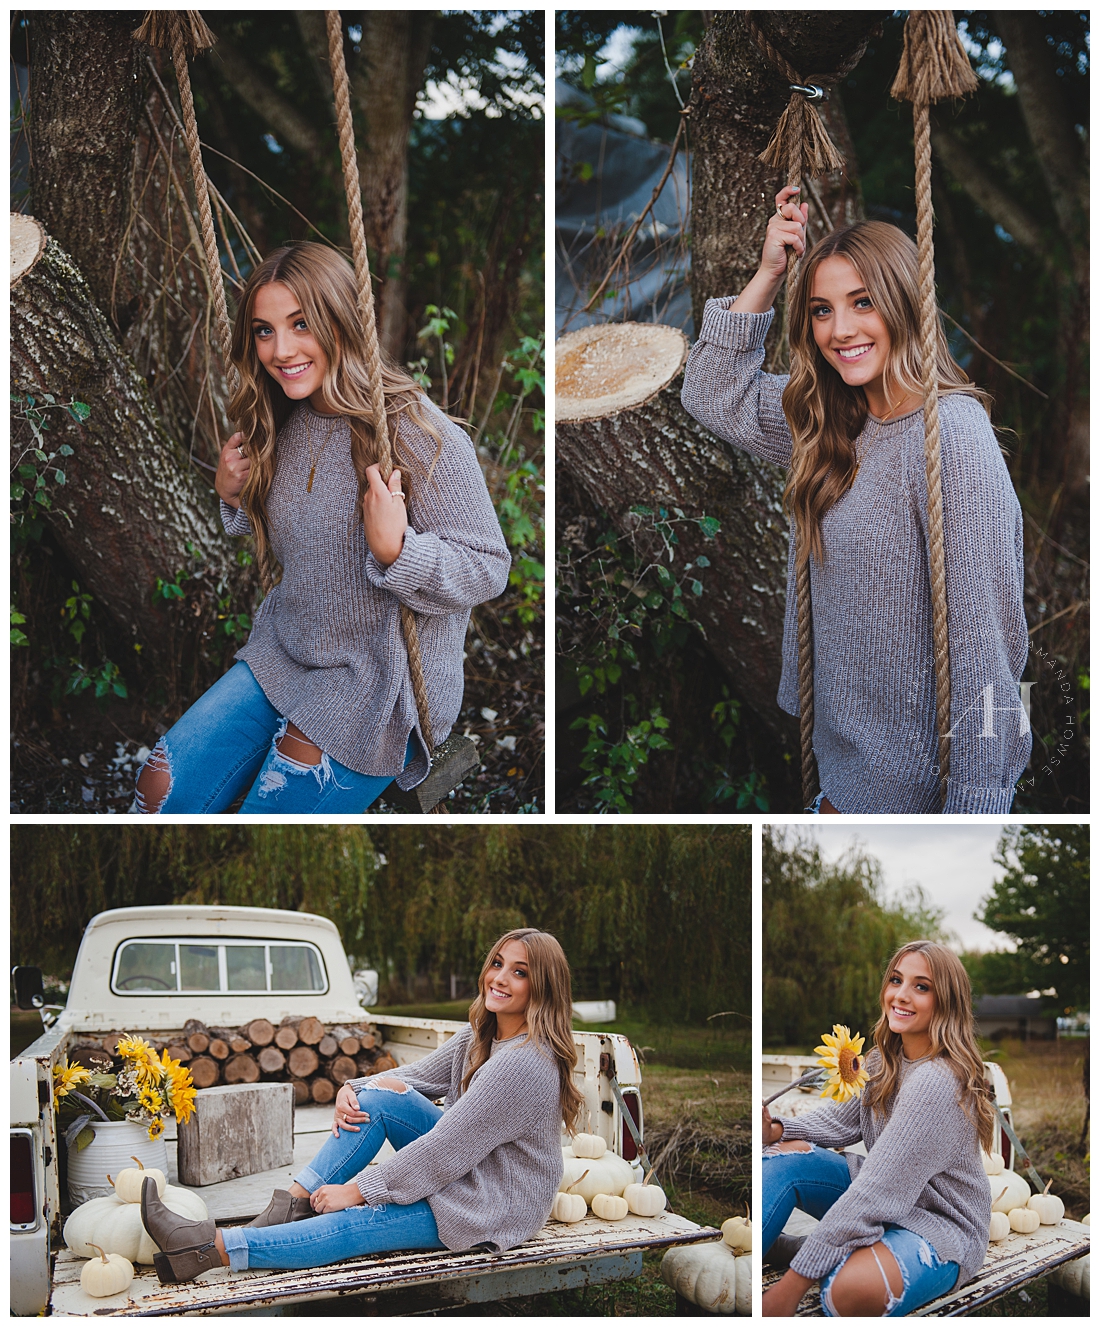 Rustic Senior Portraits with a Tree Swing and Vintage Truck | Photographed by Amanda Howse | Tacoma Senior Photographer